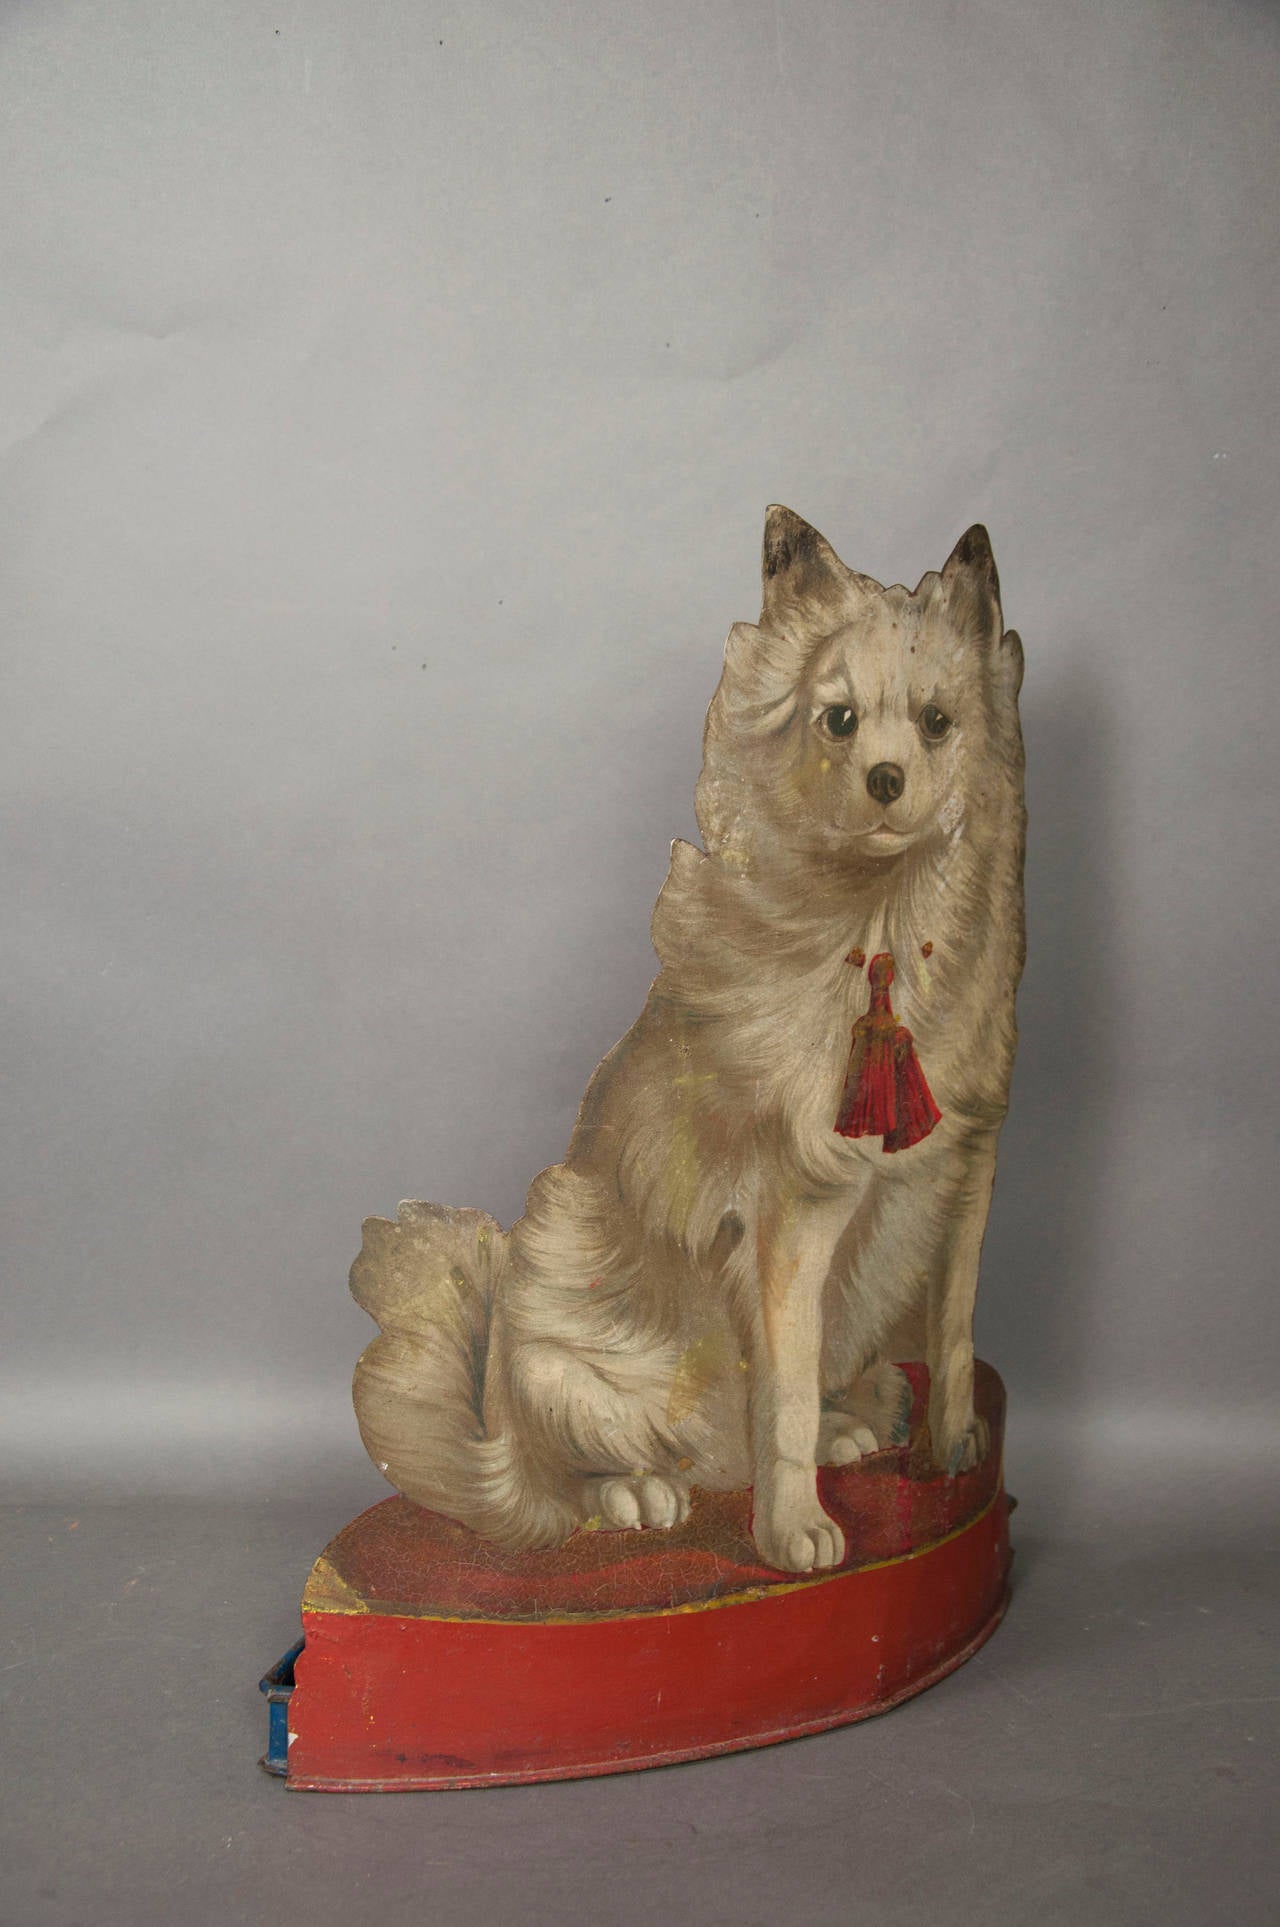 Seated dog with red tassel around his neck.